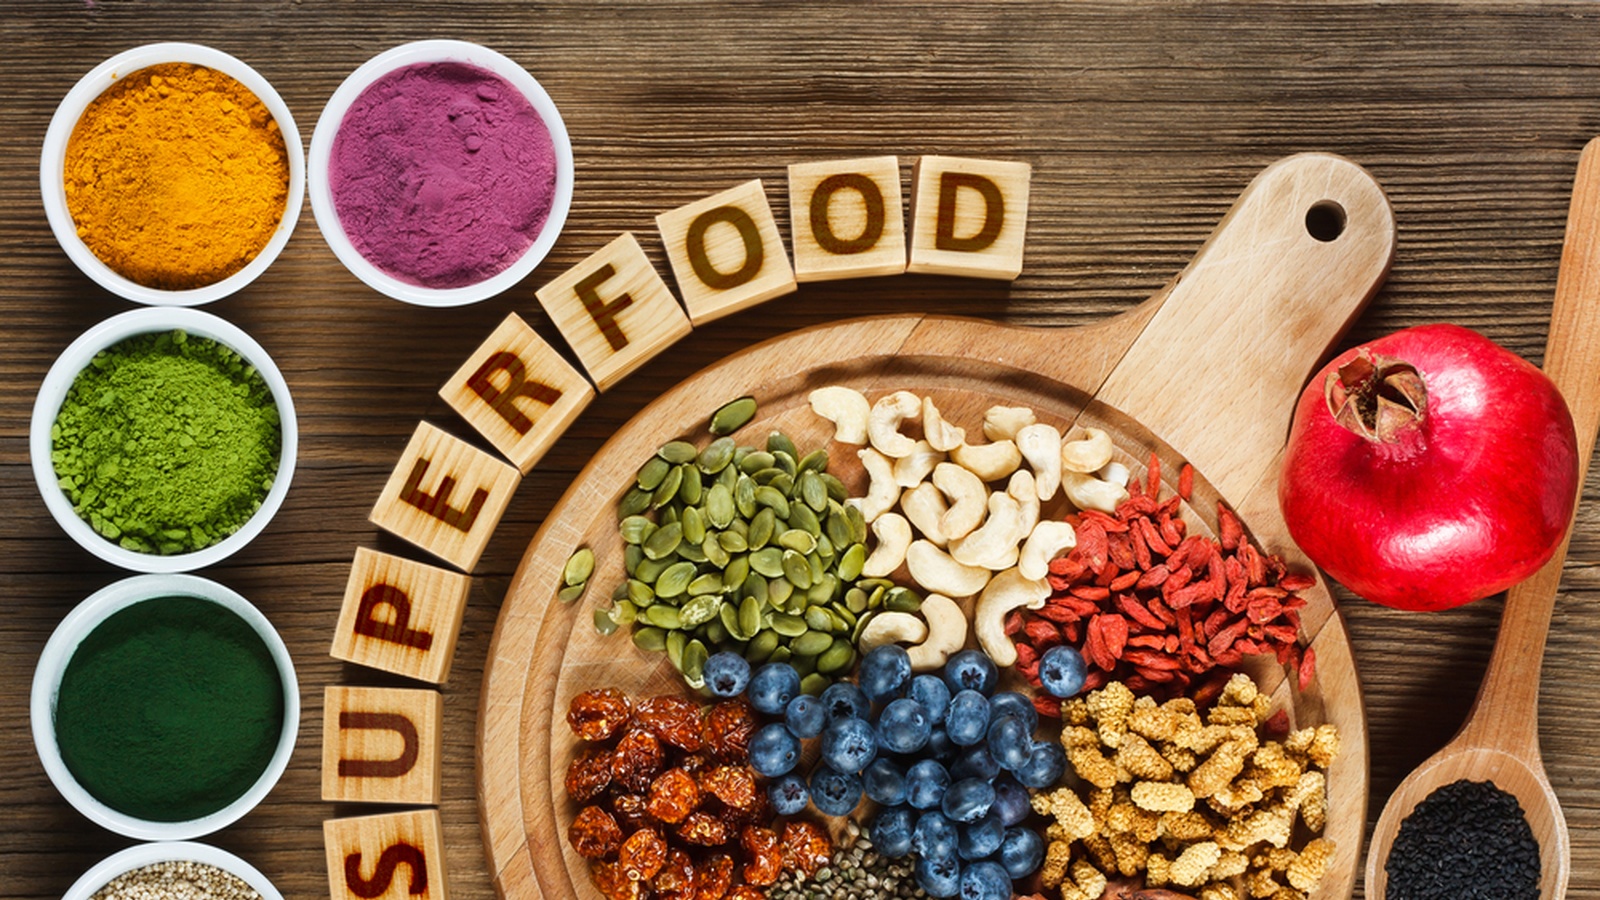 Busting Myths About Superfoods & 5 Superfoods Your Body Craves